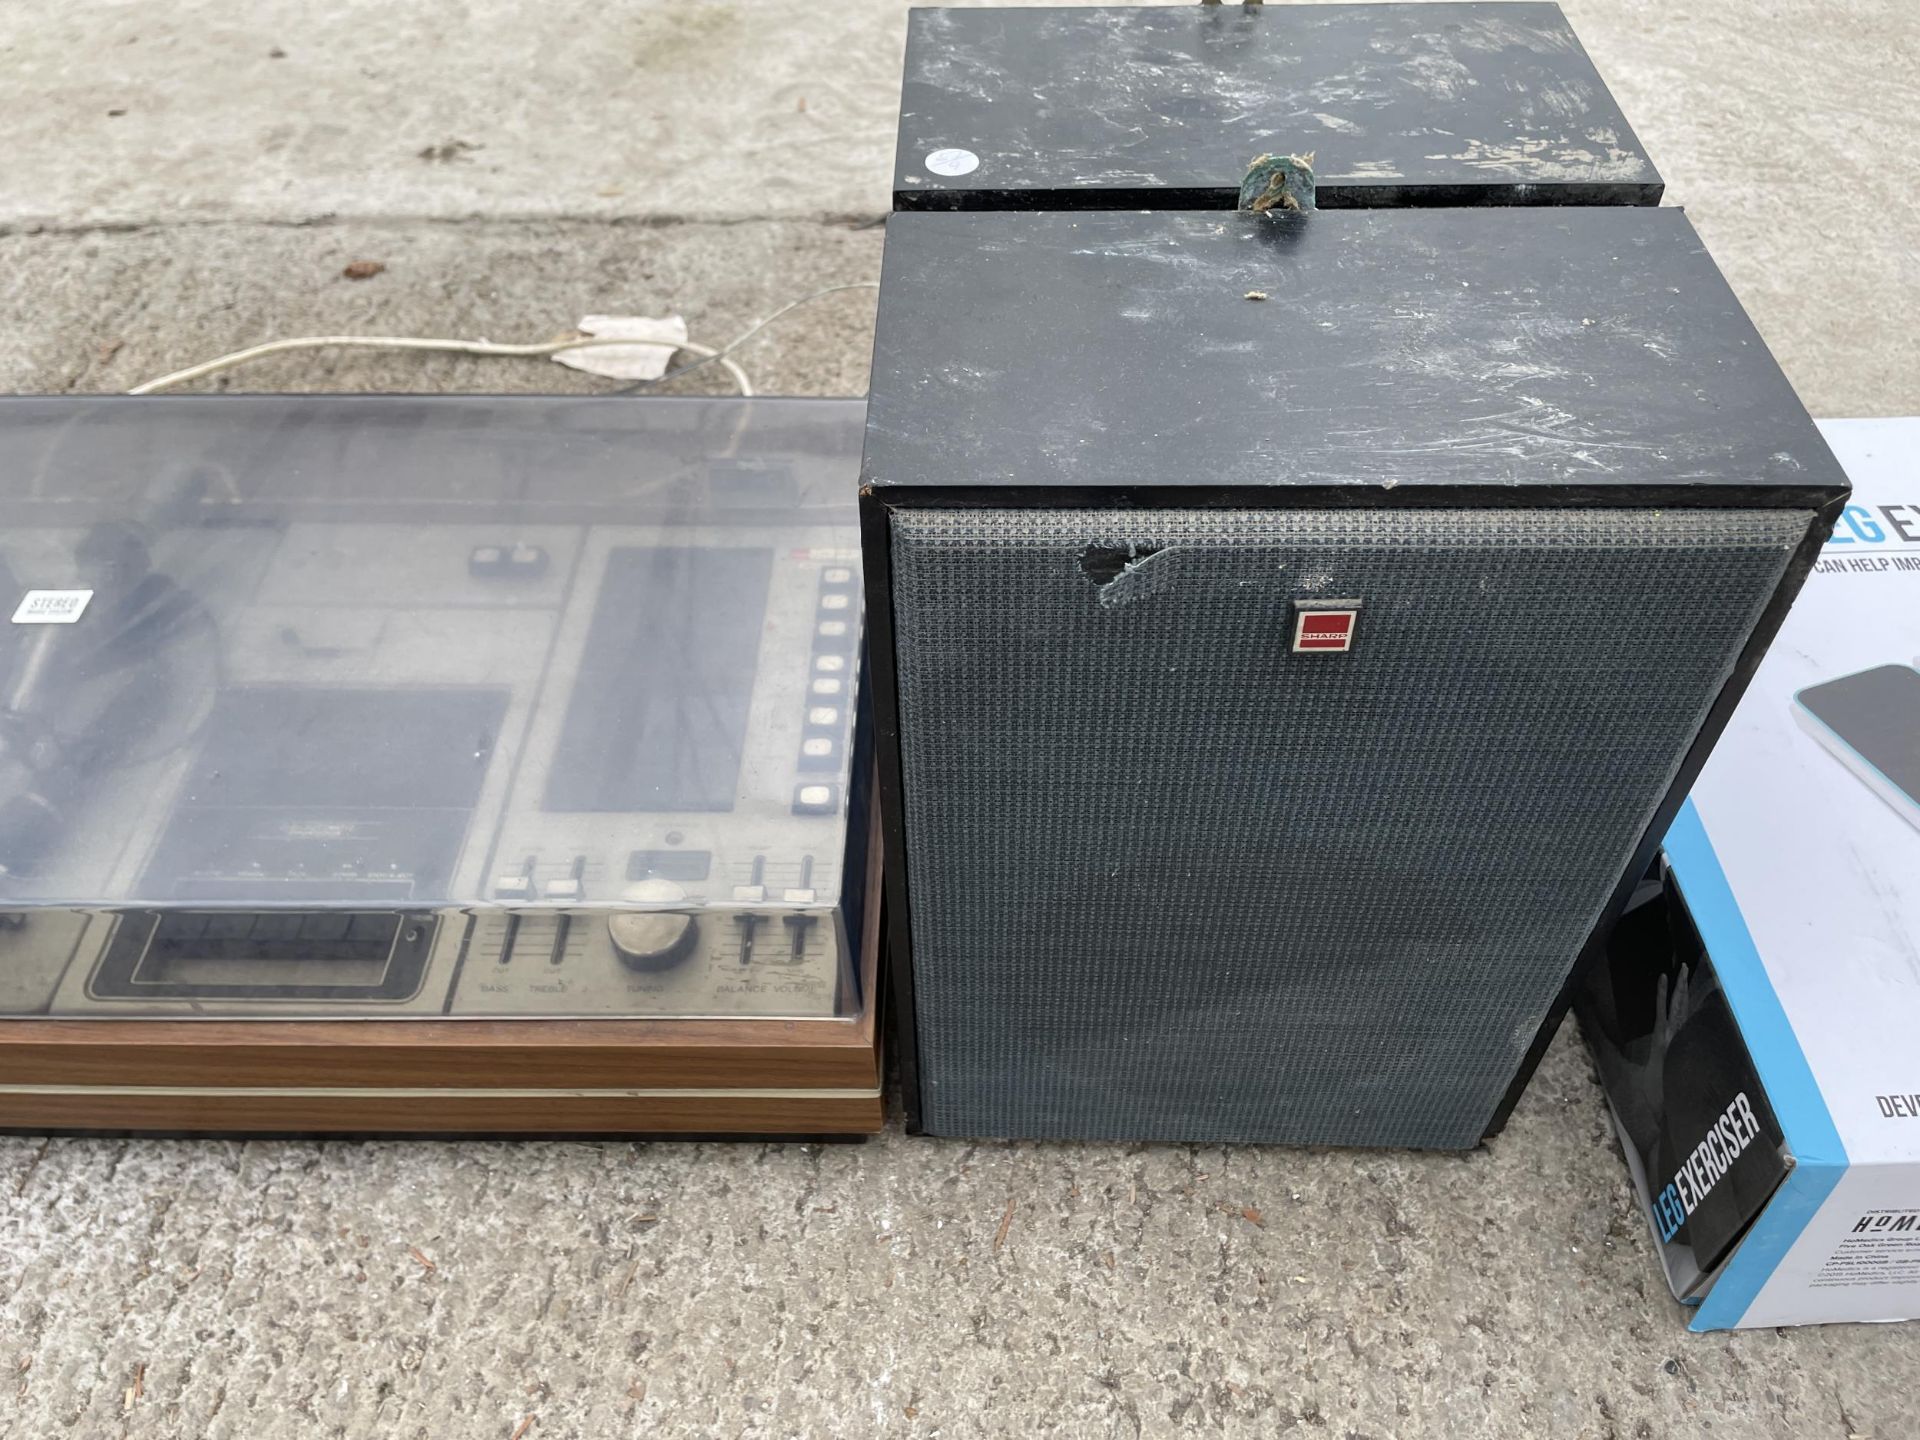 A SHARP RECORD PLAYER AND A PAIR OF SHARP SPEAKERS - Image 4 of 4